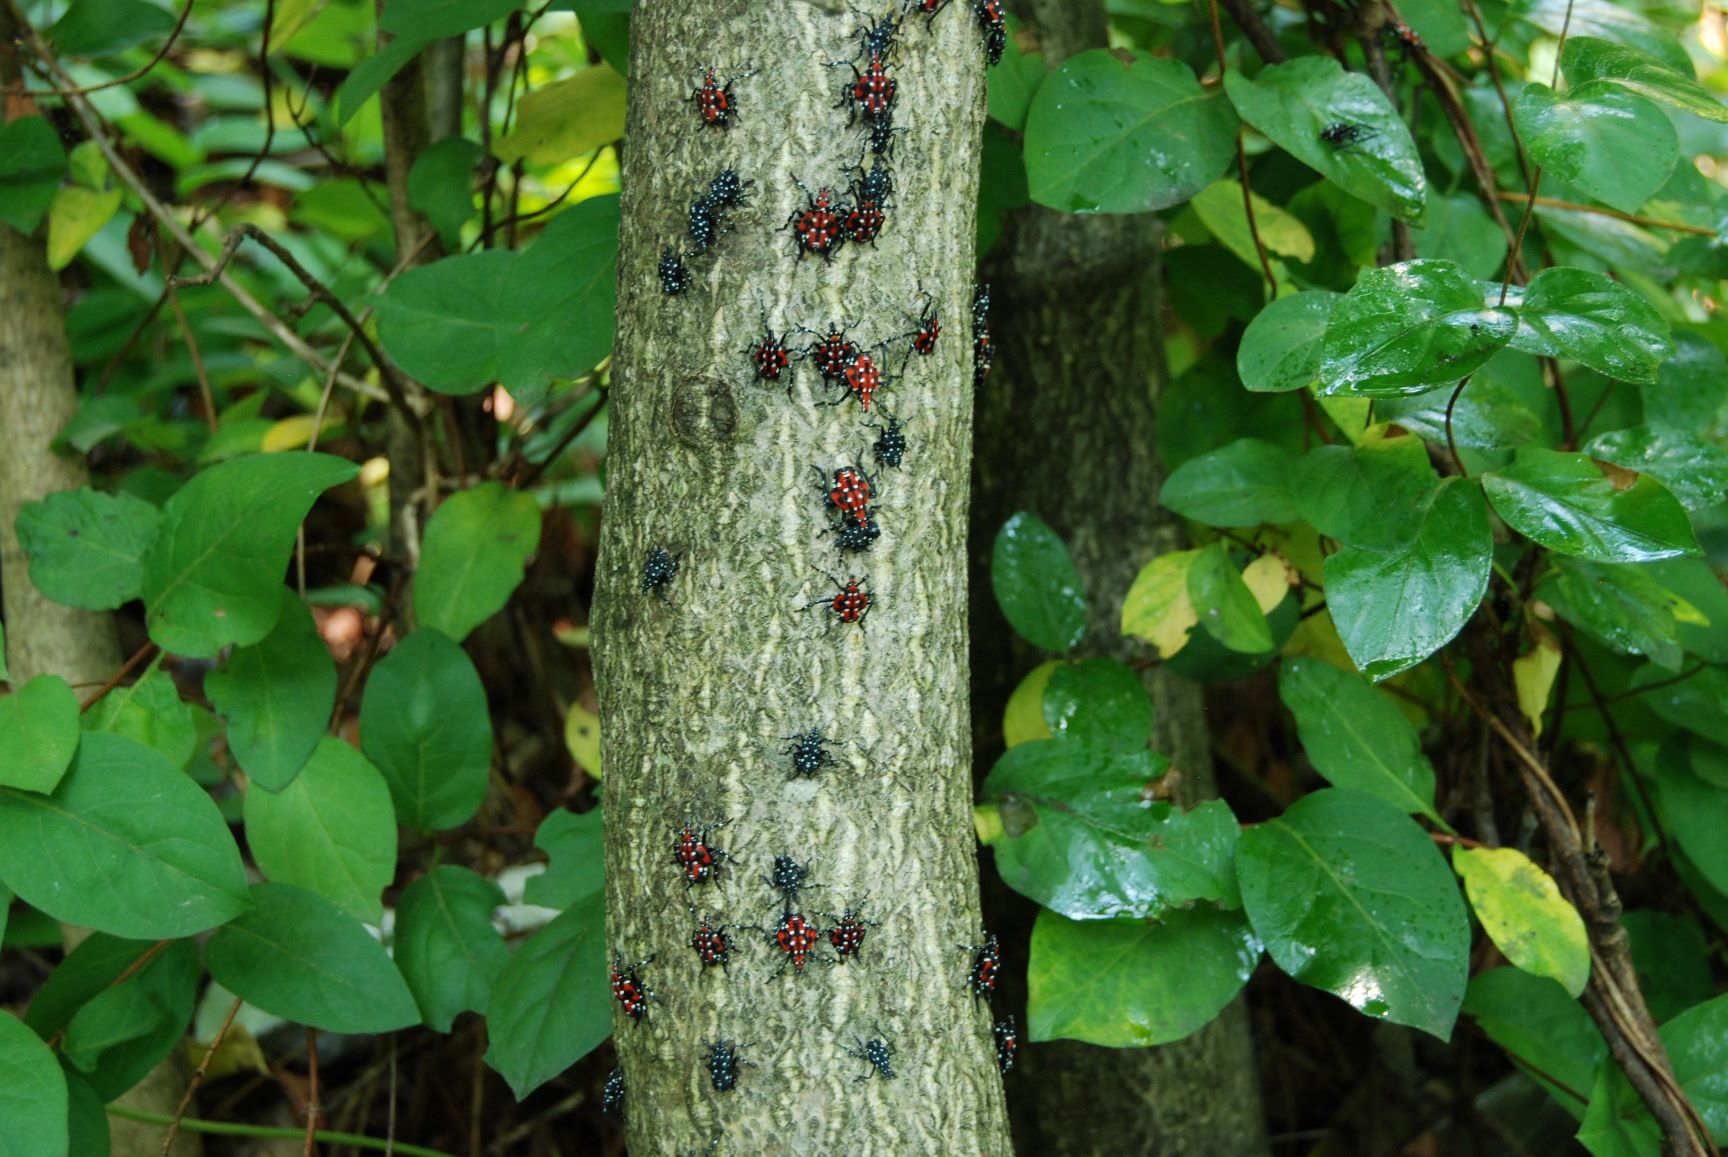 Spotted Lanternfly Nymphs